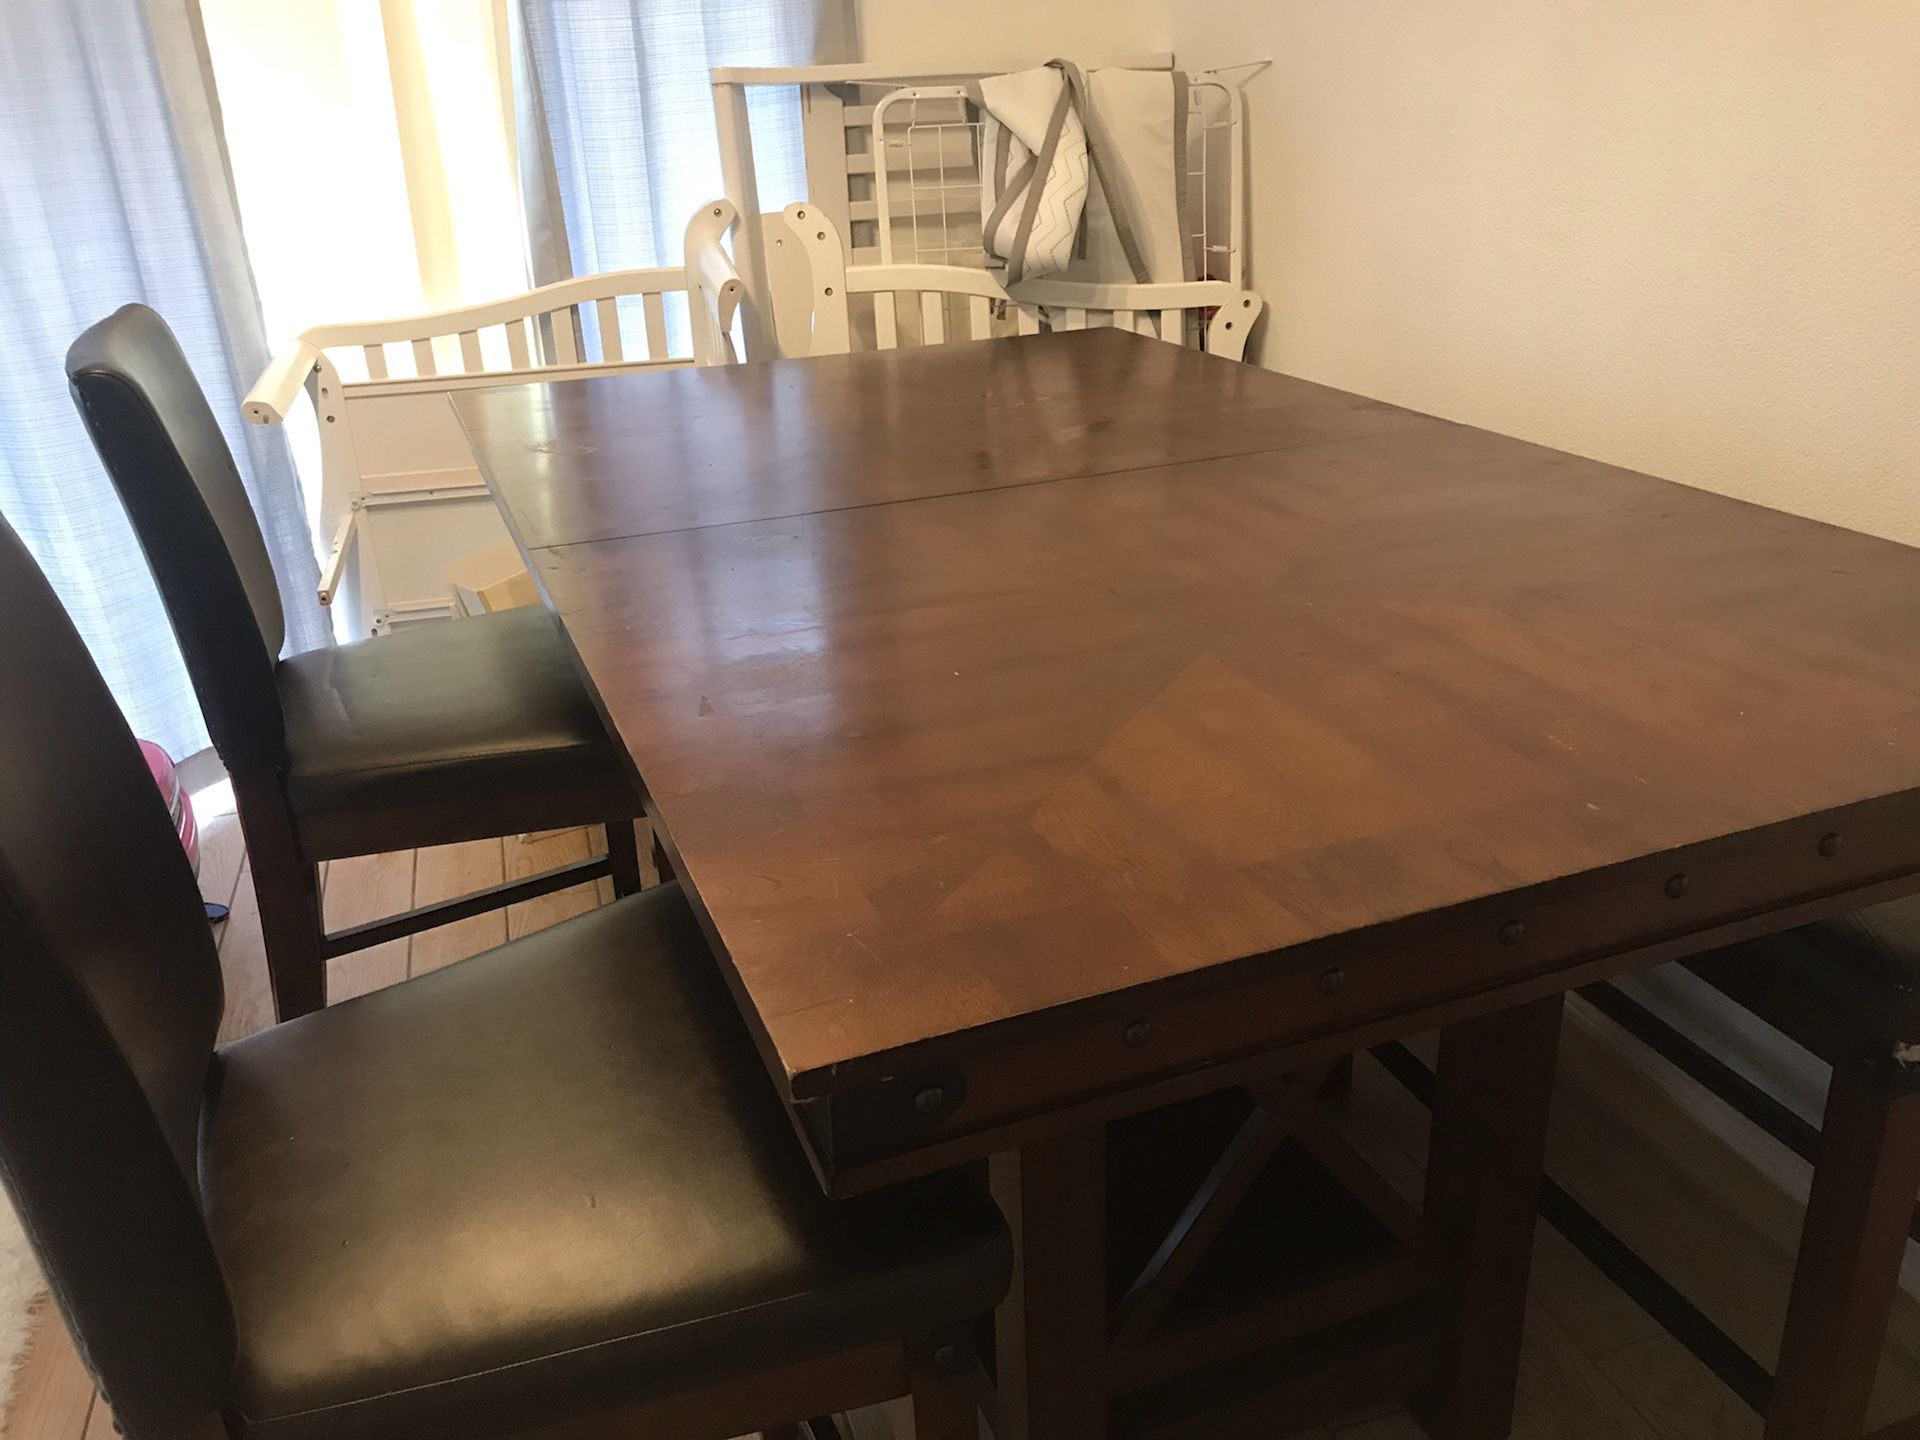 6’ Dining Room Table, Chairs and Bench W/ Kitchen Supplies